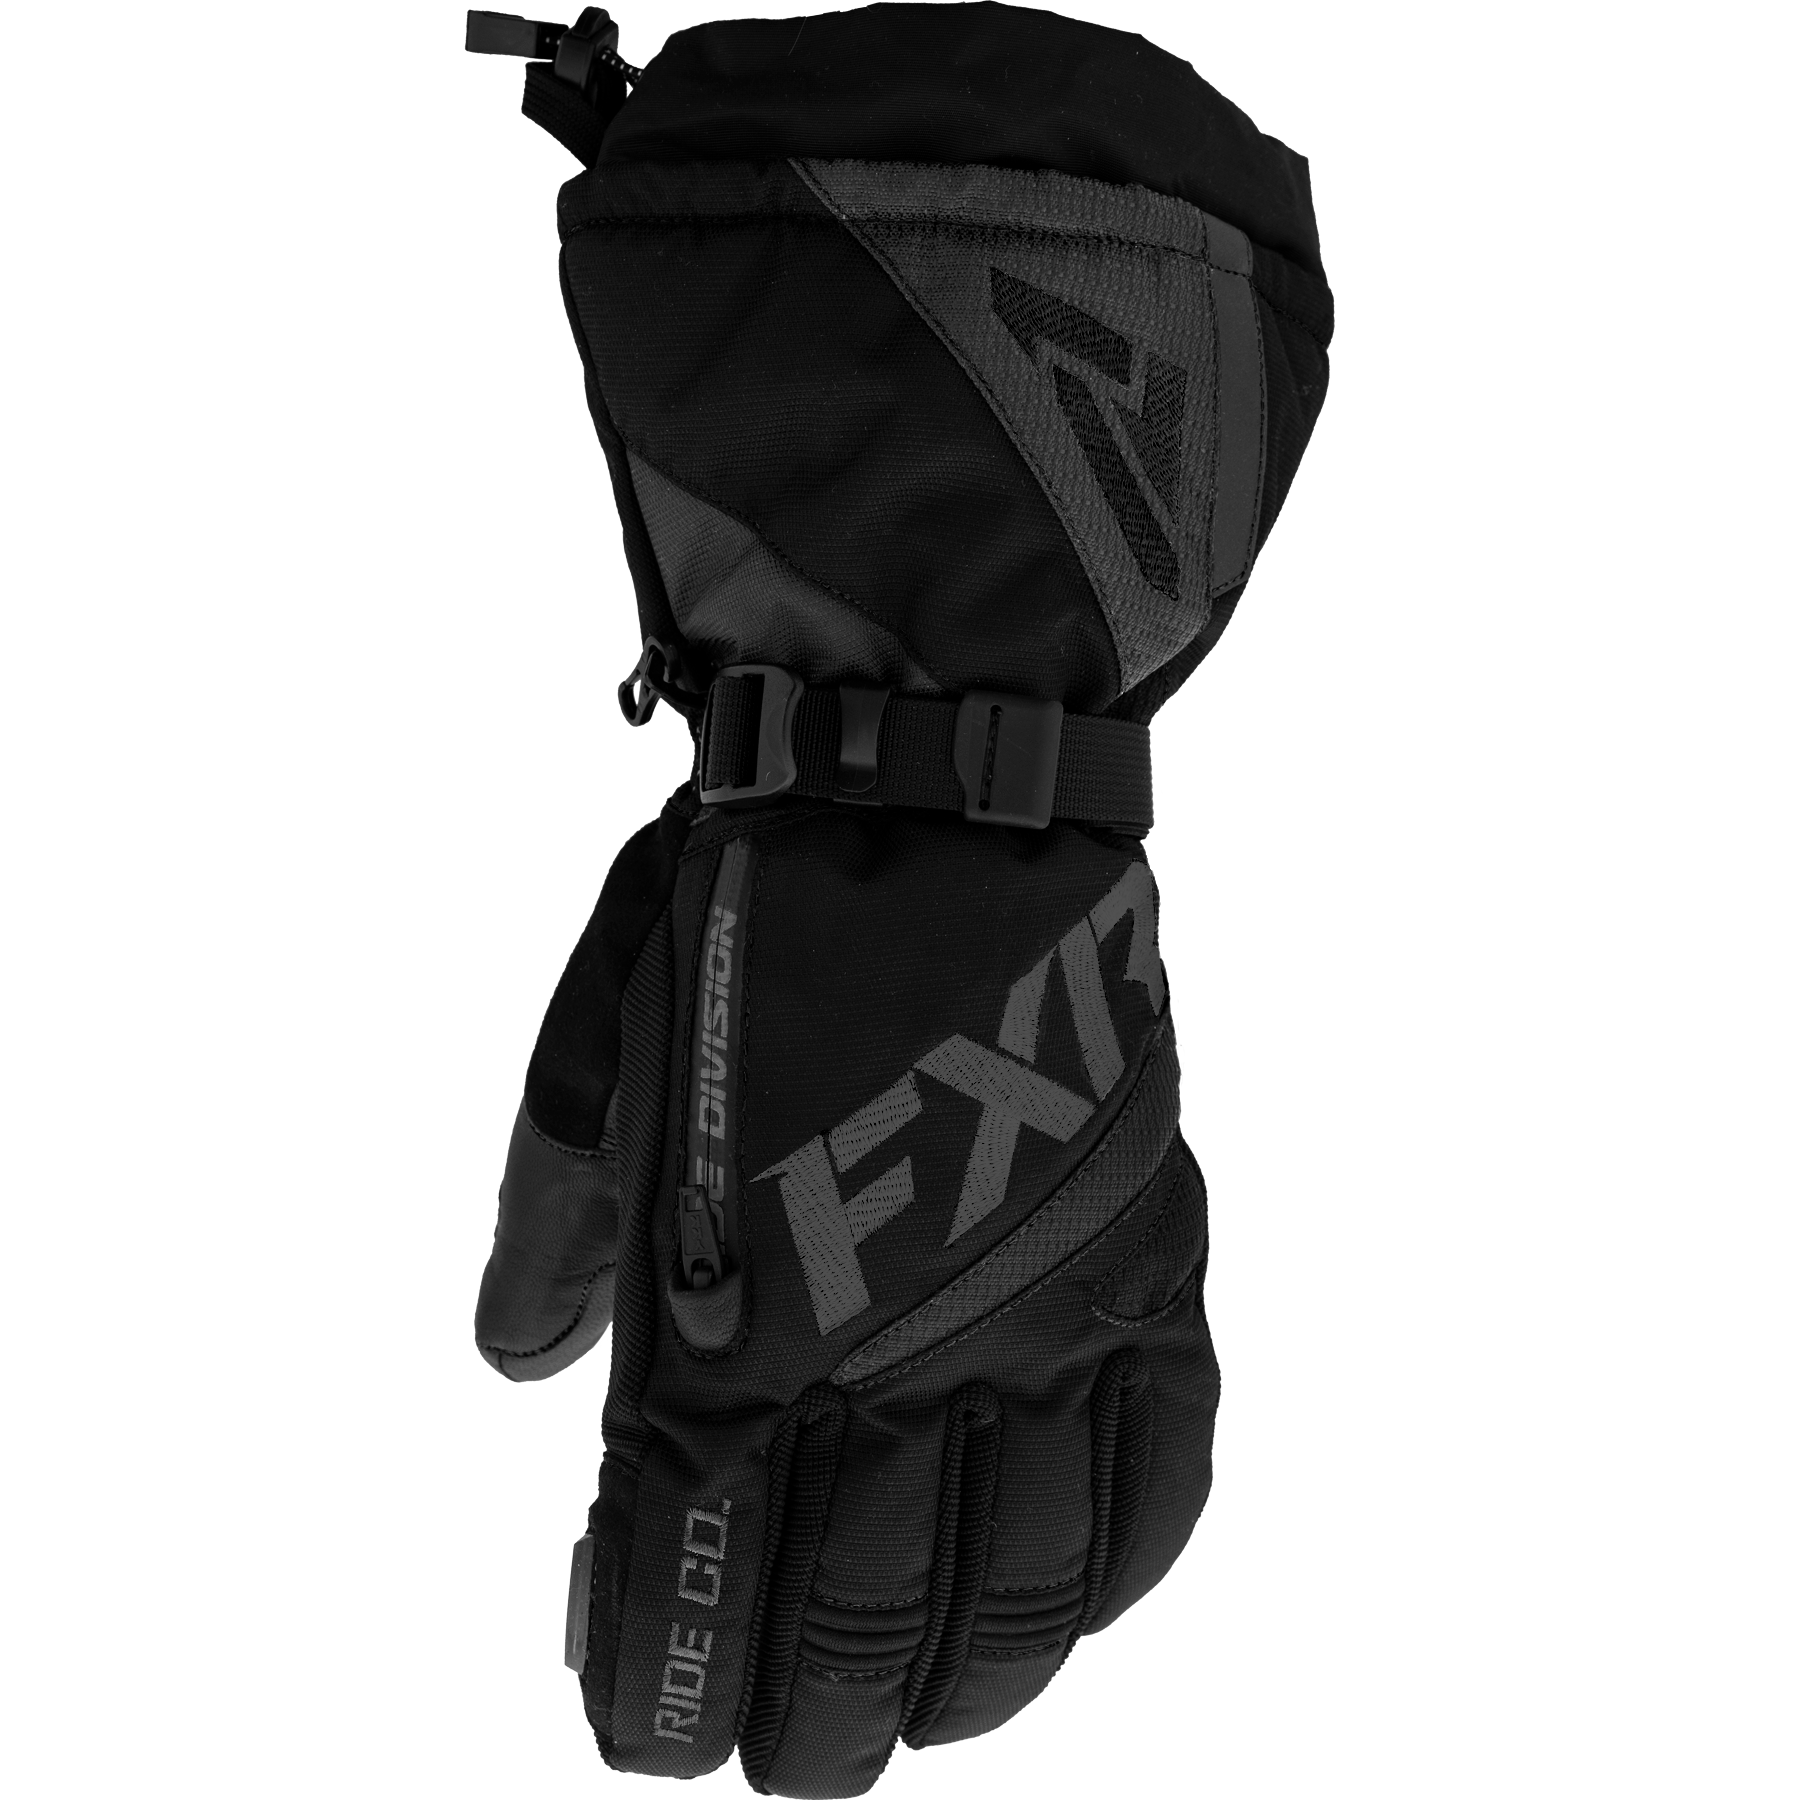 Fusion_Glove_W_BlackChar_220833-_1008_front.png